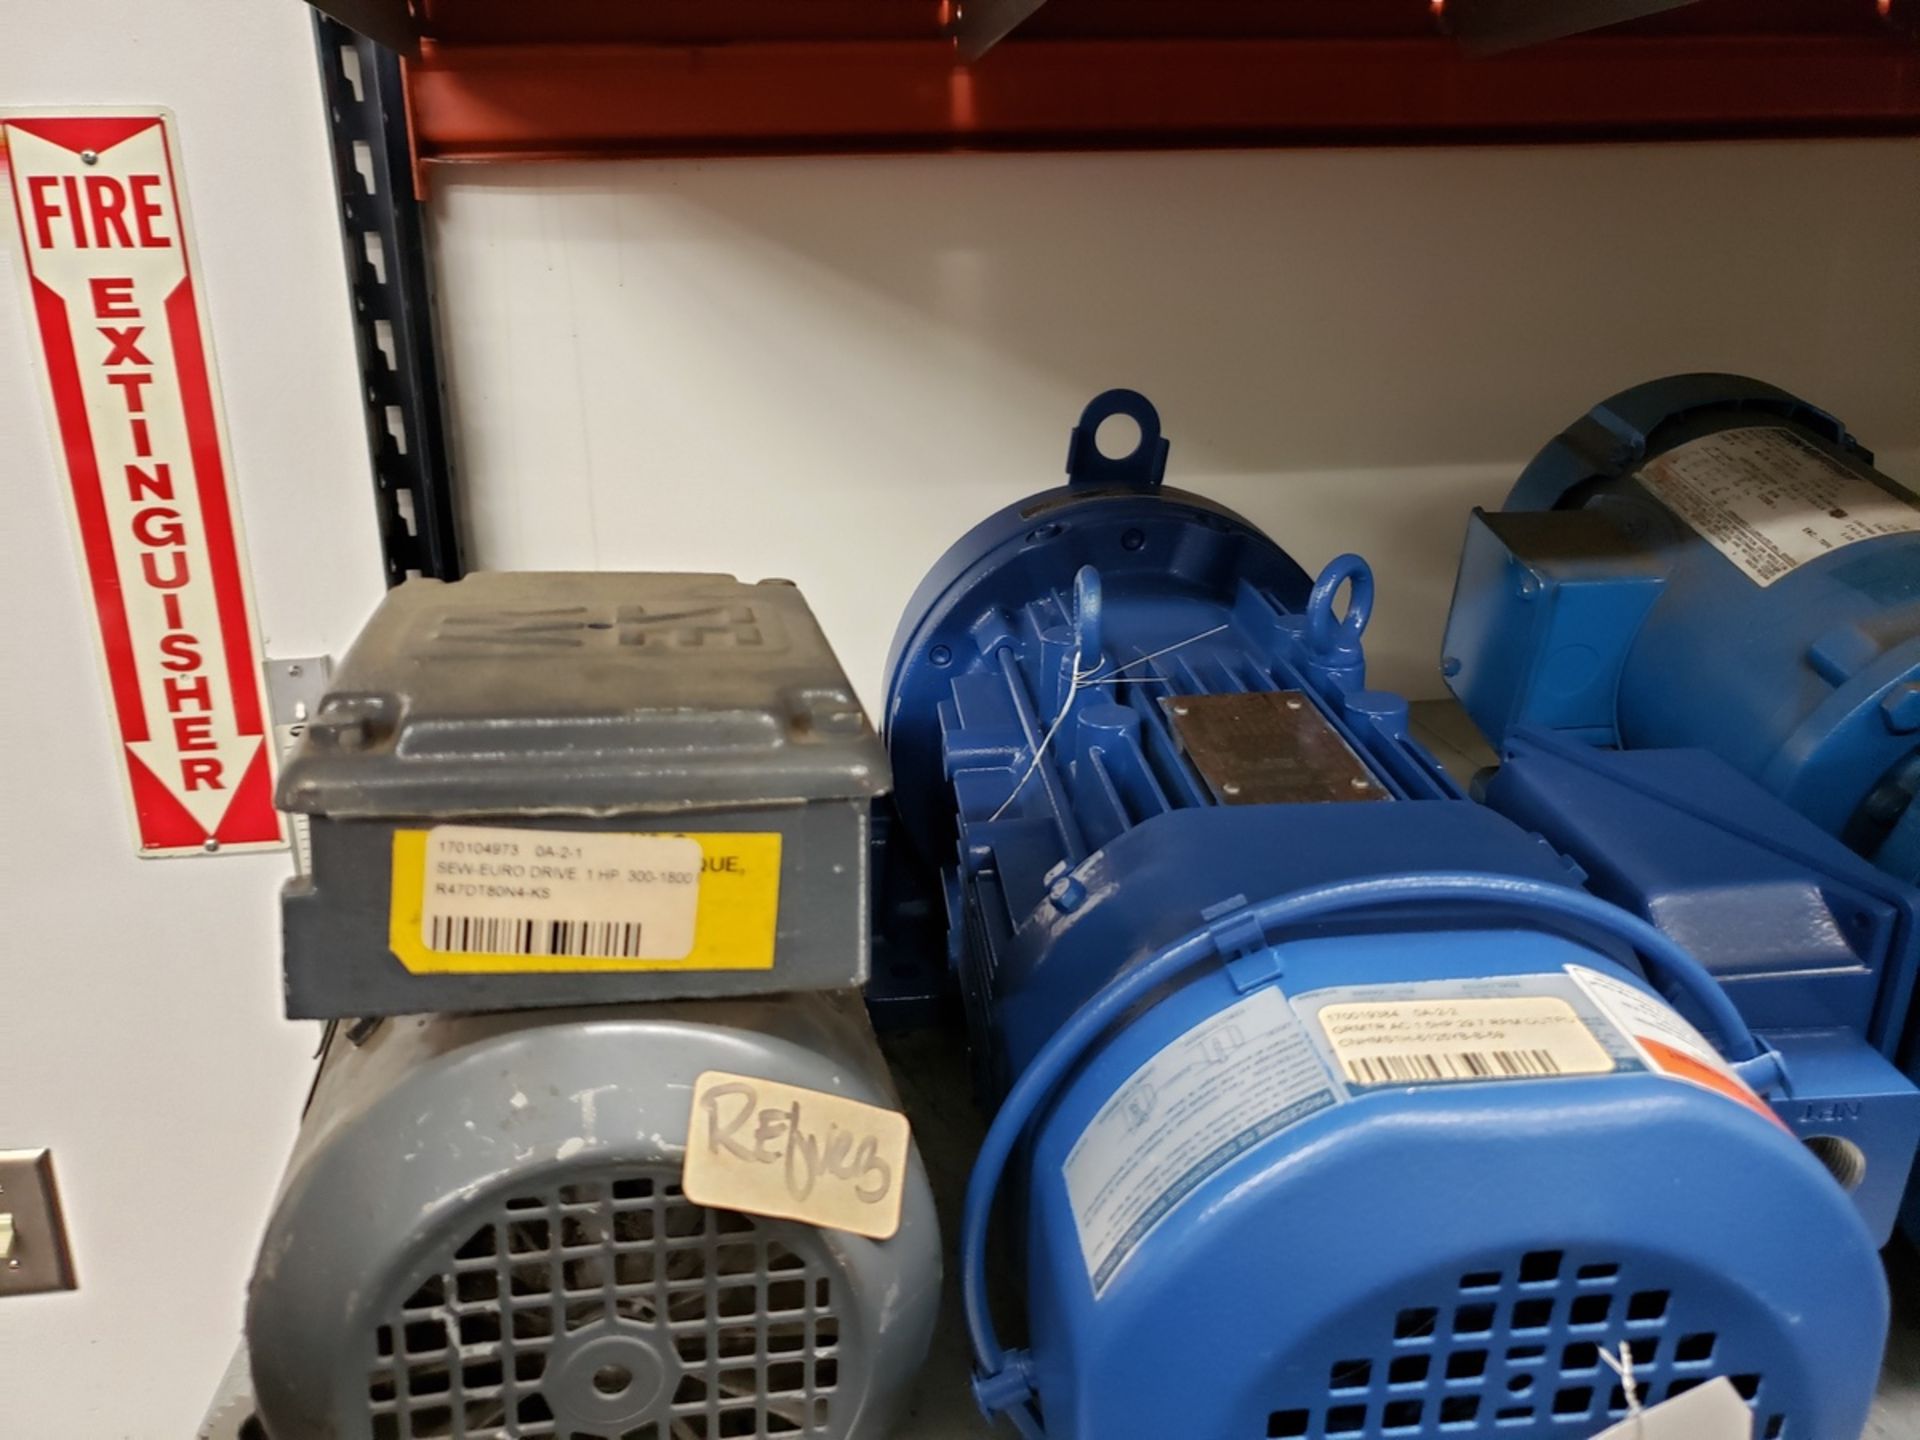 Lot of Pumps, Electric Motors & Gearboxes - Subj to Bulk | Reqd Rig Fee: $100 - Image 2 of 6